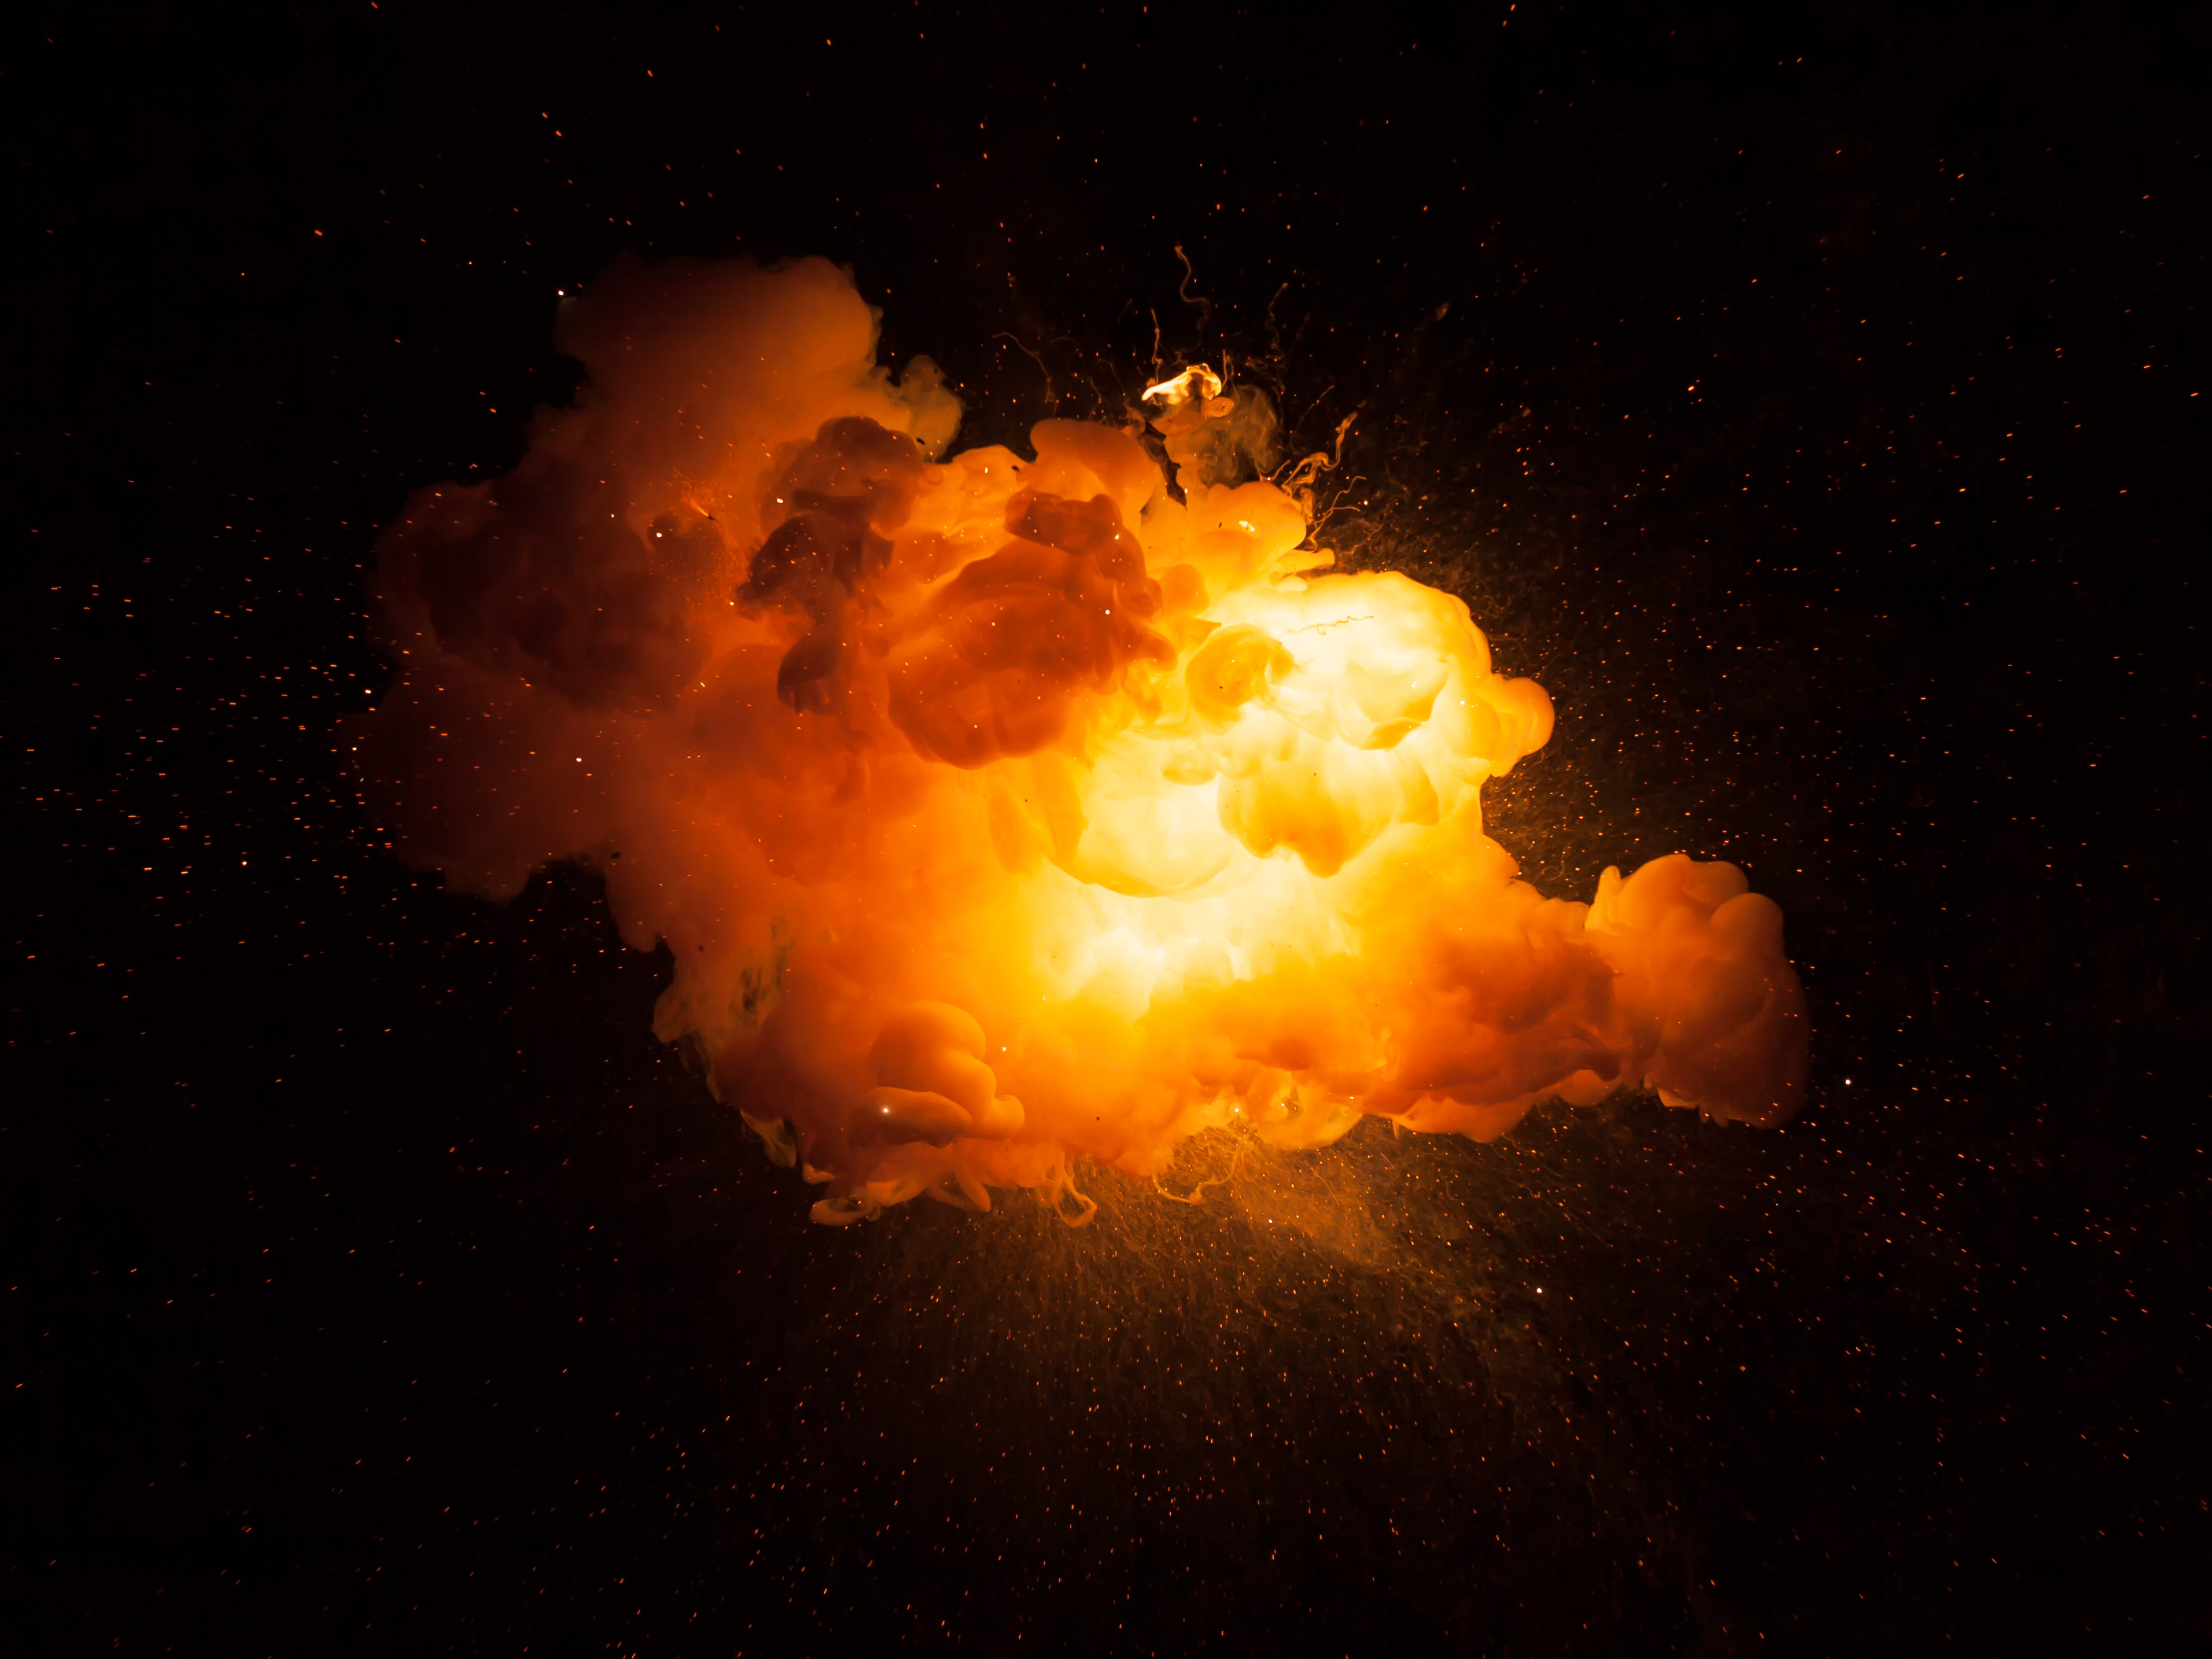 Texture of a fiery explosion | Source: Shutterstock